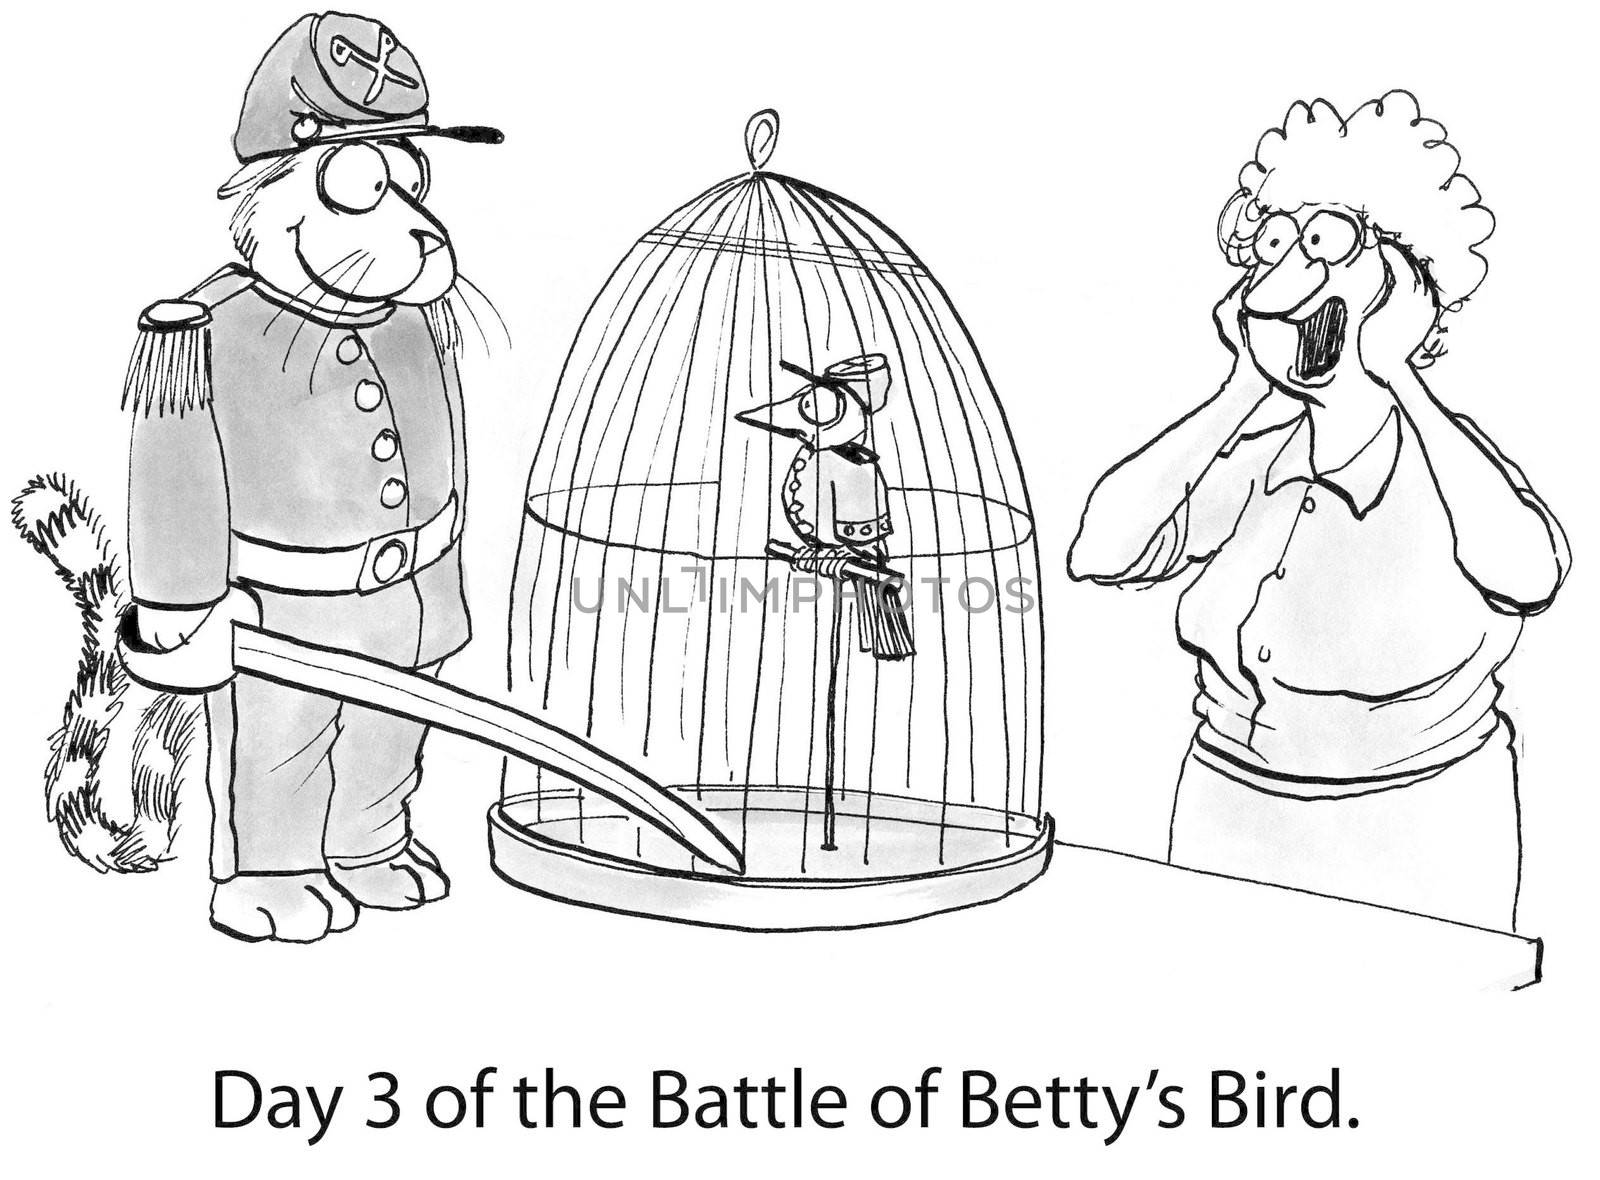 Day 3 of the Battle of Betty's Bird.